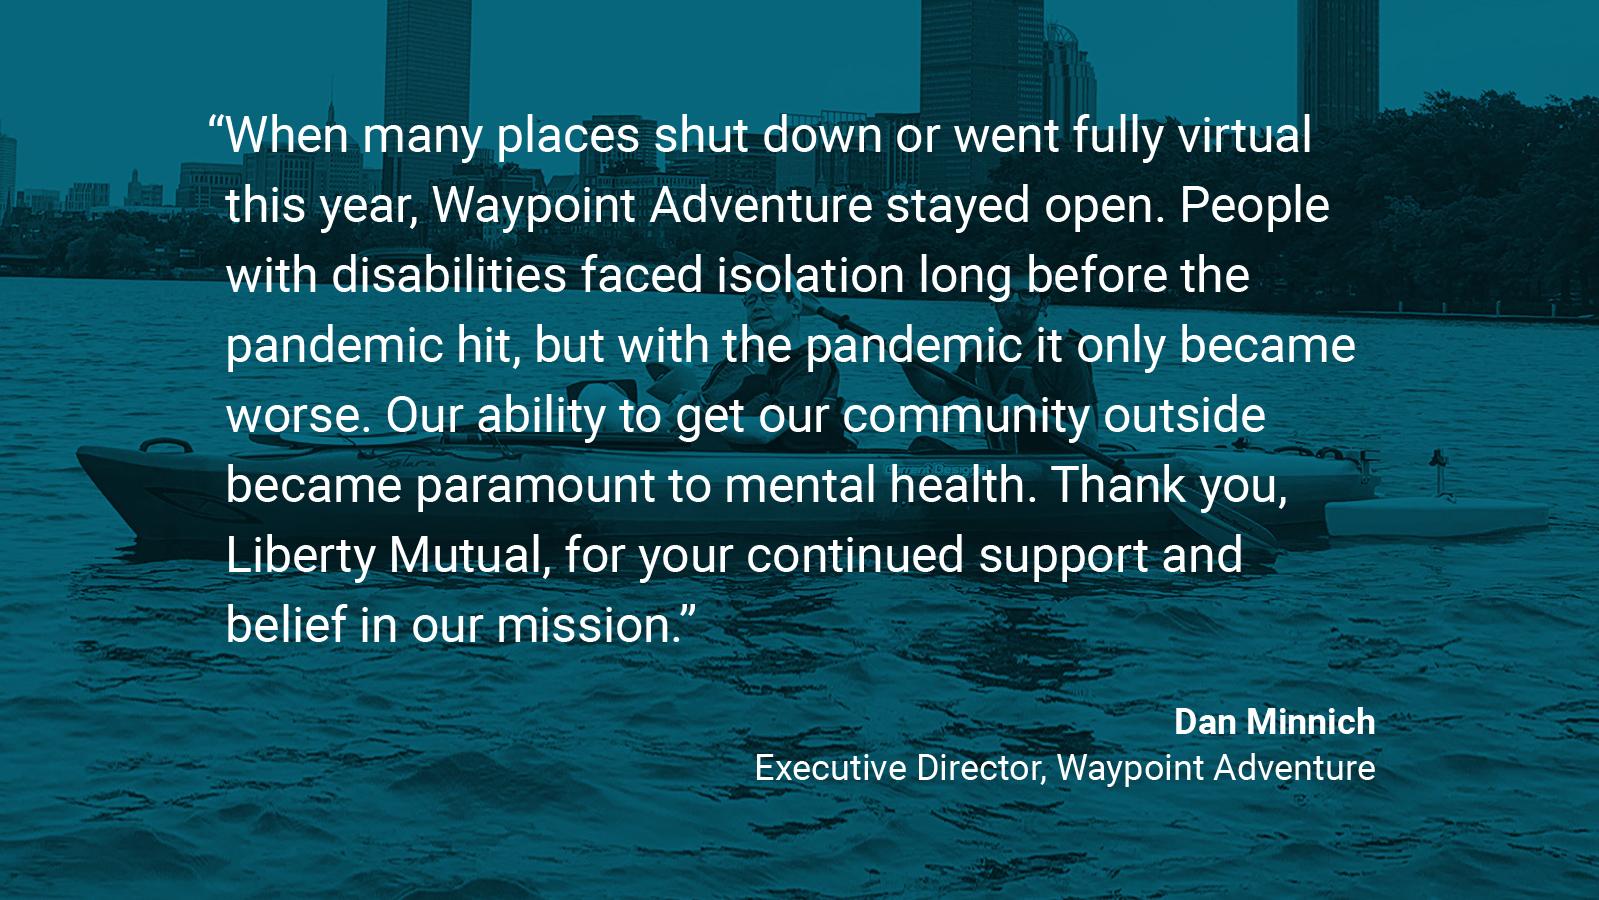 (slide 3 of 4) Quote by: Dan Minnich, Executive at Waypoint Adventure: "When many places shut down or went fully virtual this year, Waypoint Adventure stayed open. People with disabilities faced isolation long before the pandemic hit, but with the pandemic it only became worse. Our ability to get our community outside became paramount to mental health. Thank you, Liberty Mutual, for your continued support and belief in our mission.. 